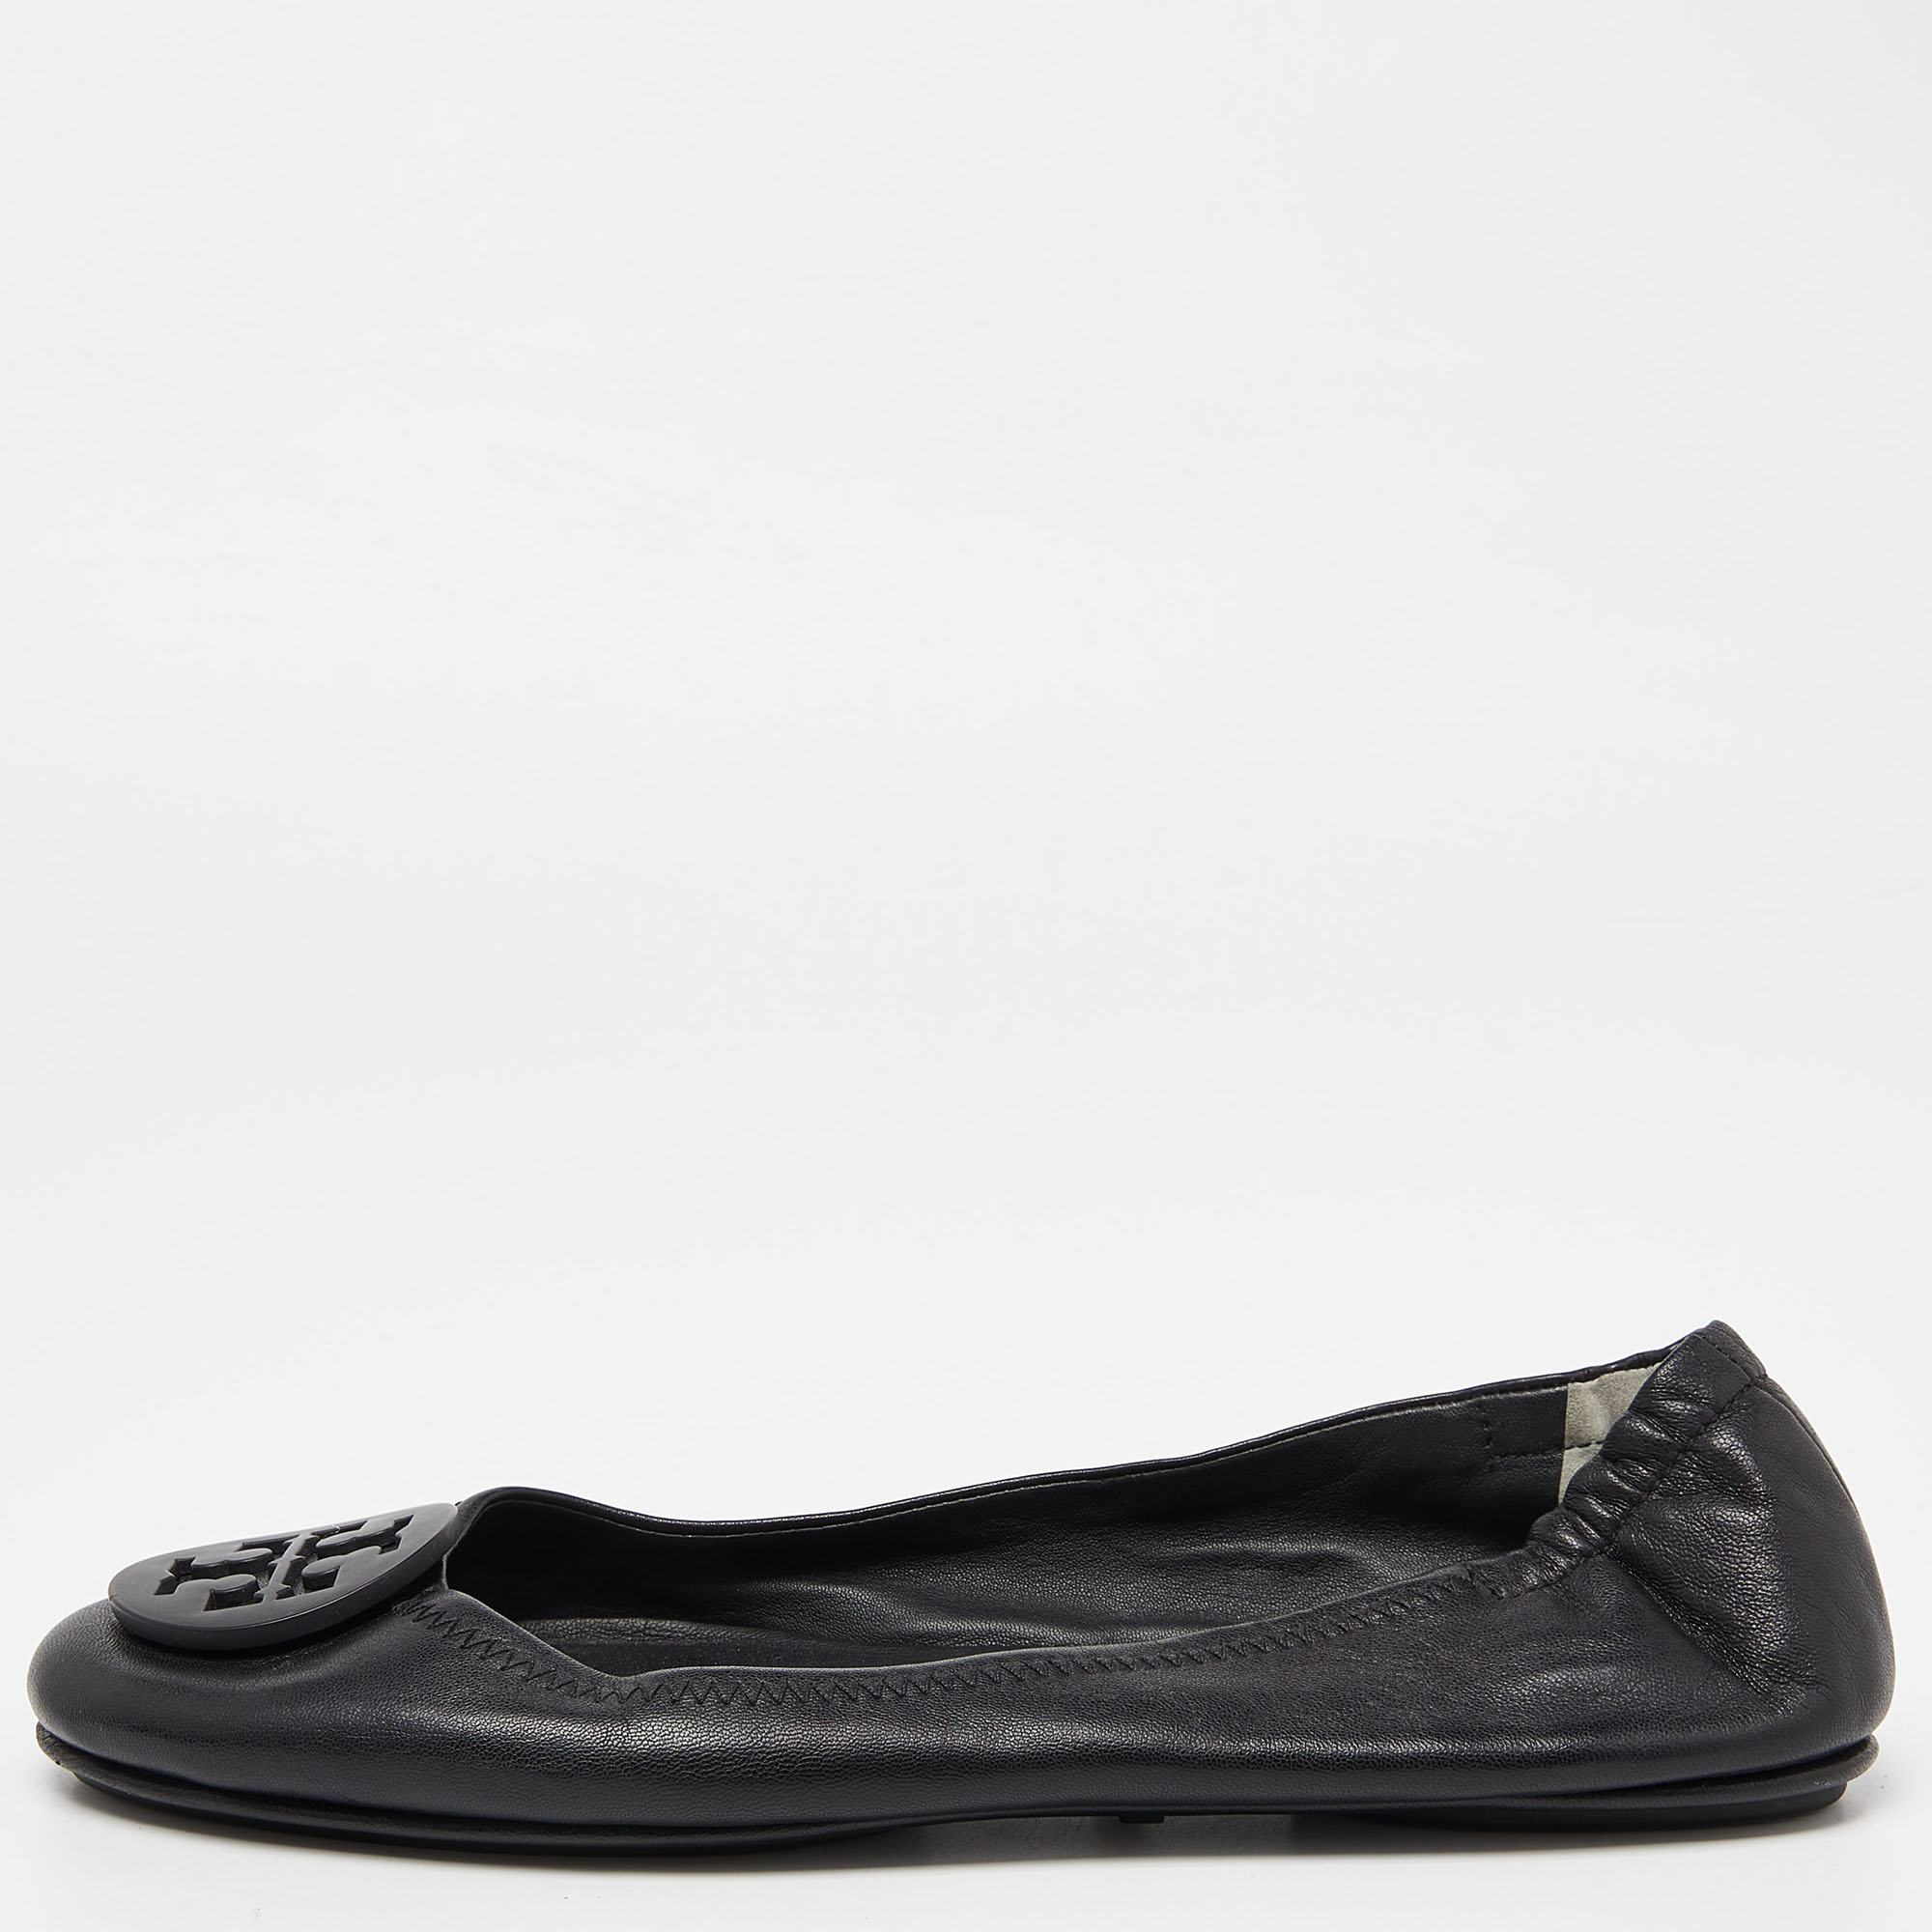 Tory Burch Black Leather Ballet Flats Size 38